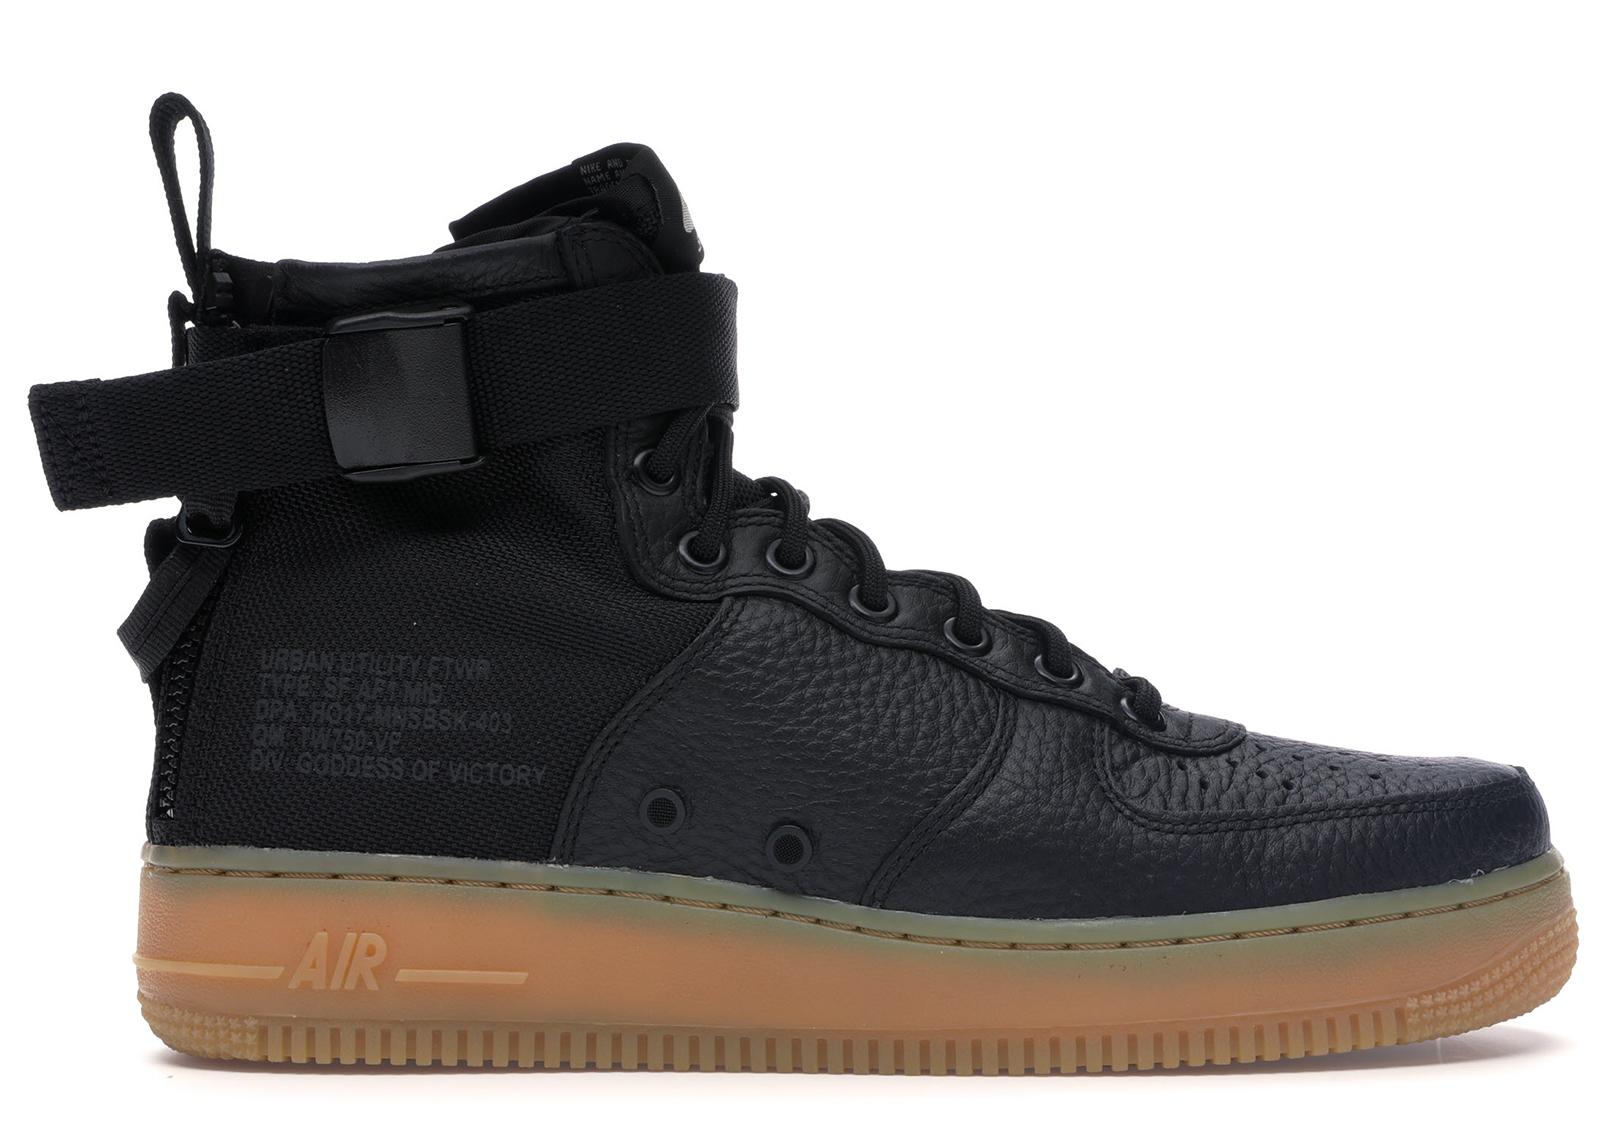 Nike Leather Sf Air Force 1 Mid Black Gum for Men - Lyst